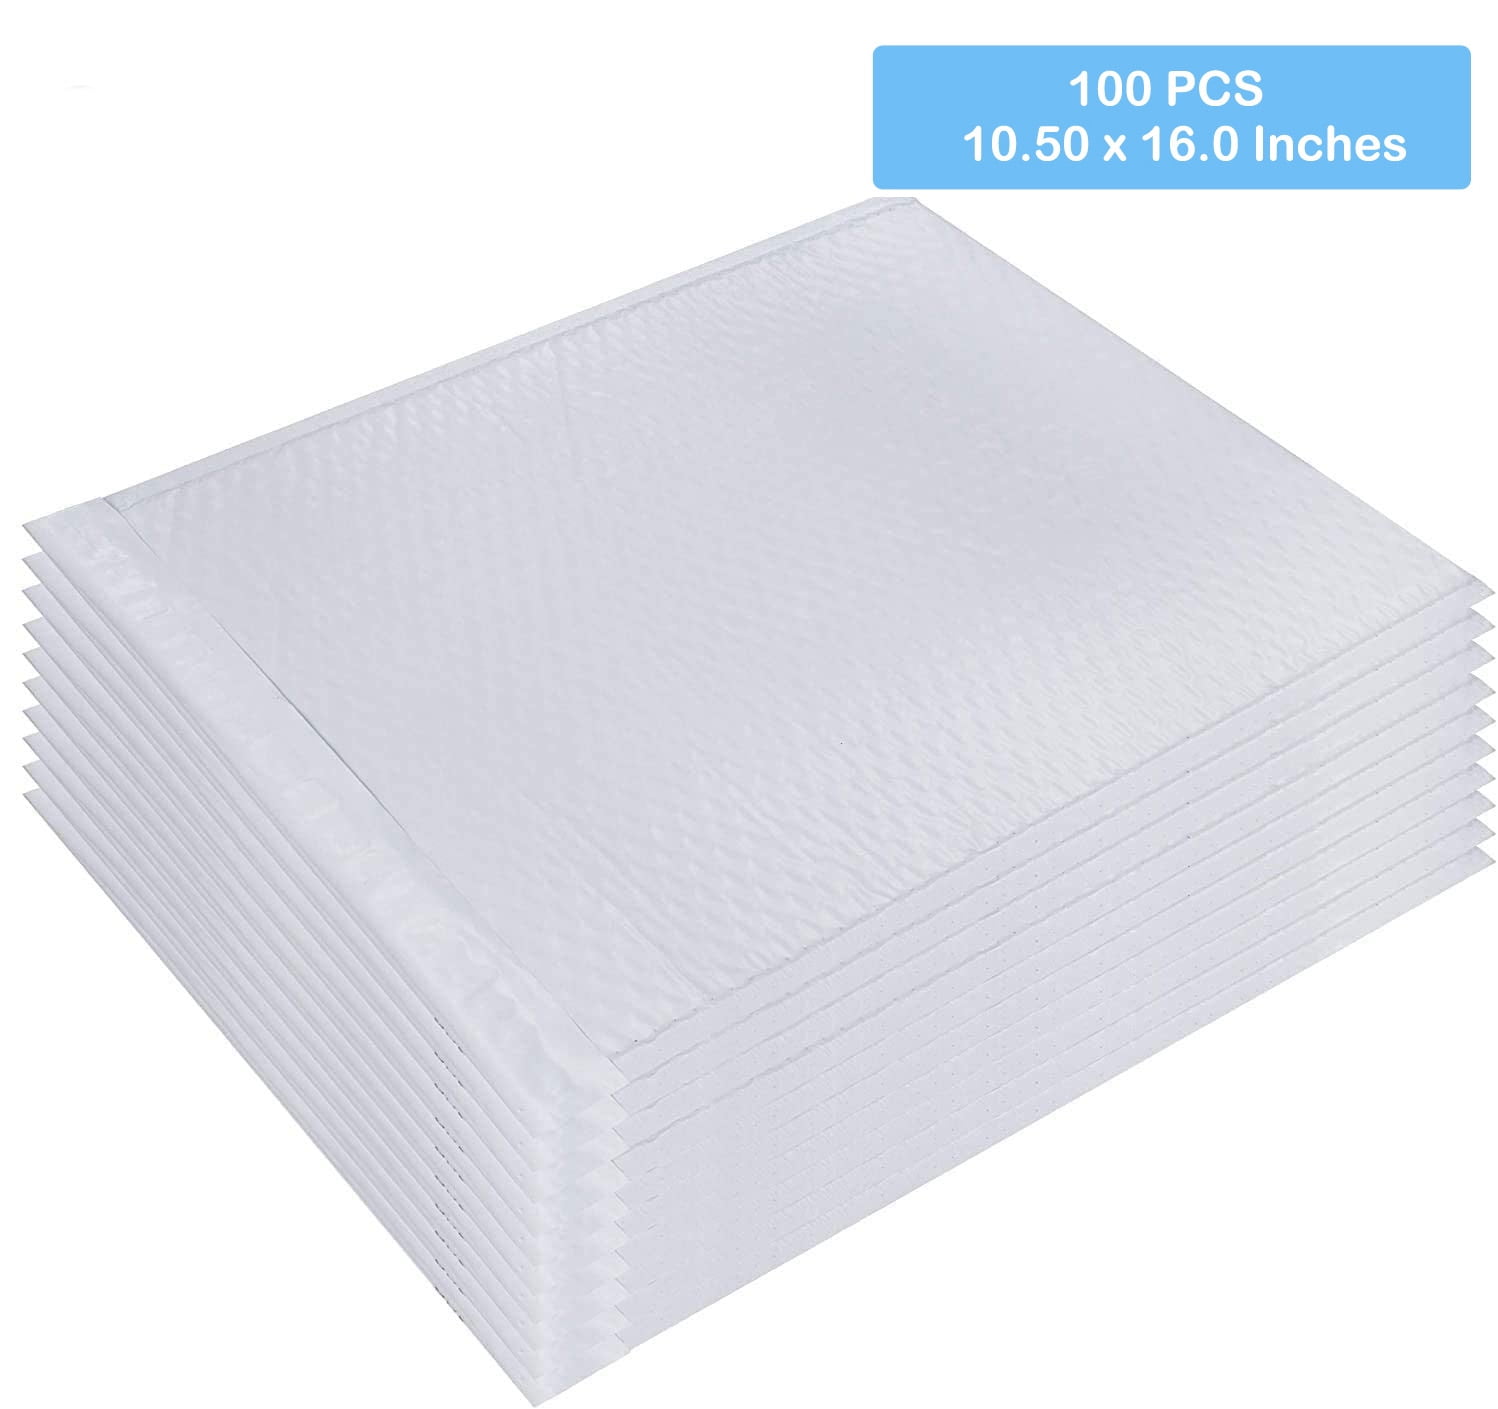 ProLine 100 Size #7 14.25x20 Poly High Bubble Mailer Shipping Envelopes Bags 